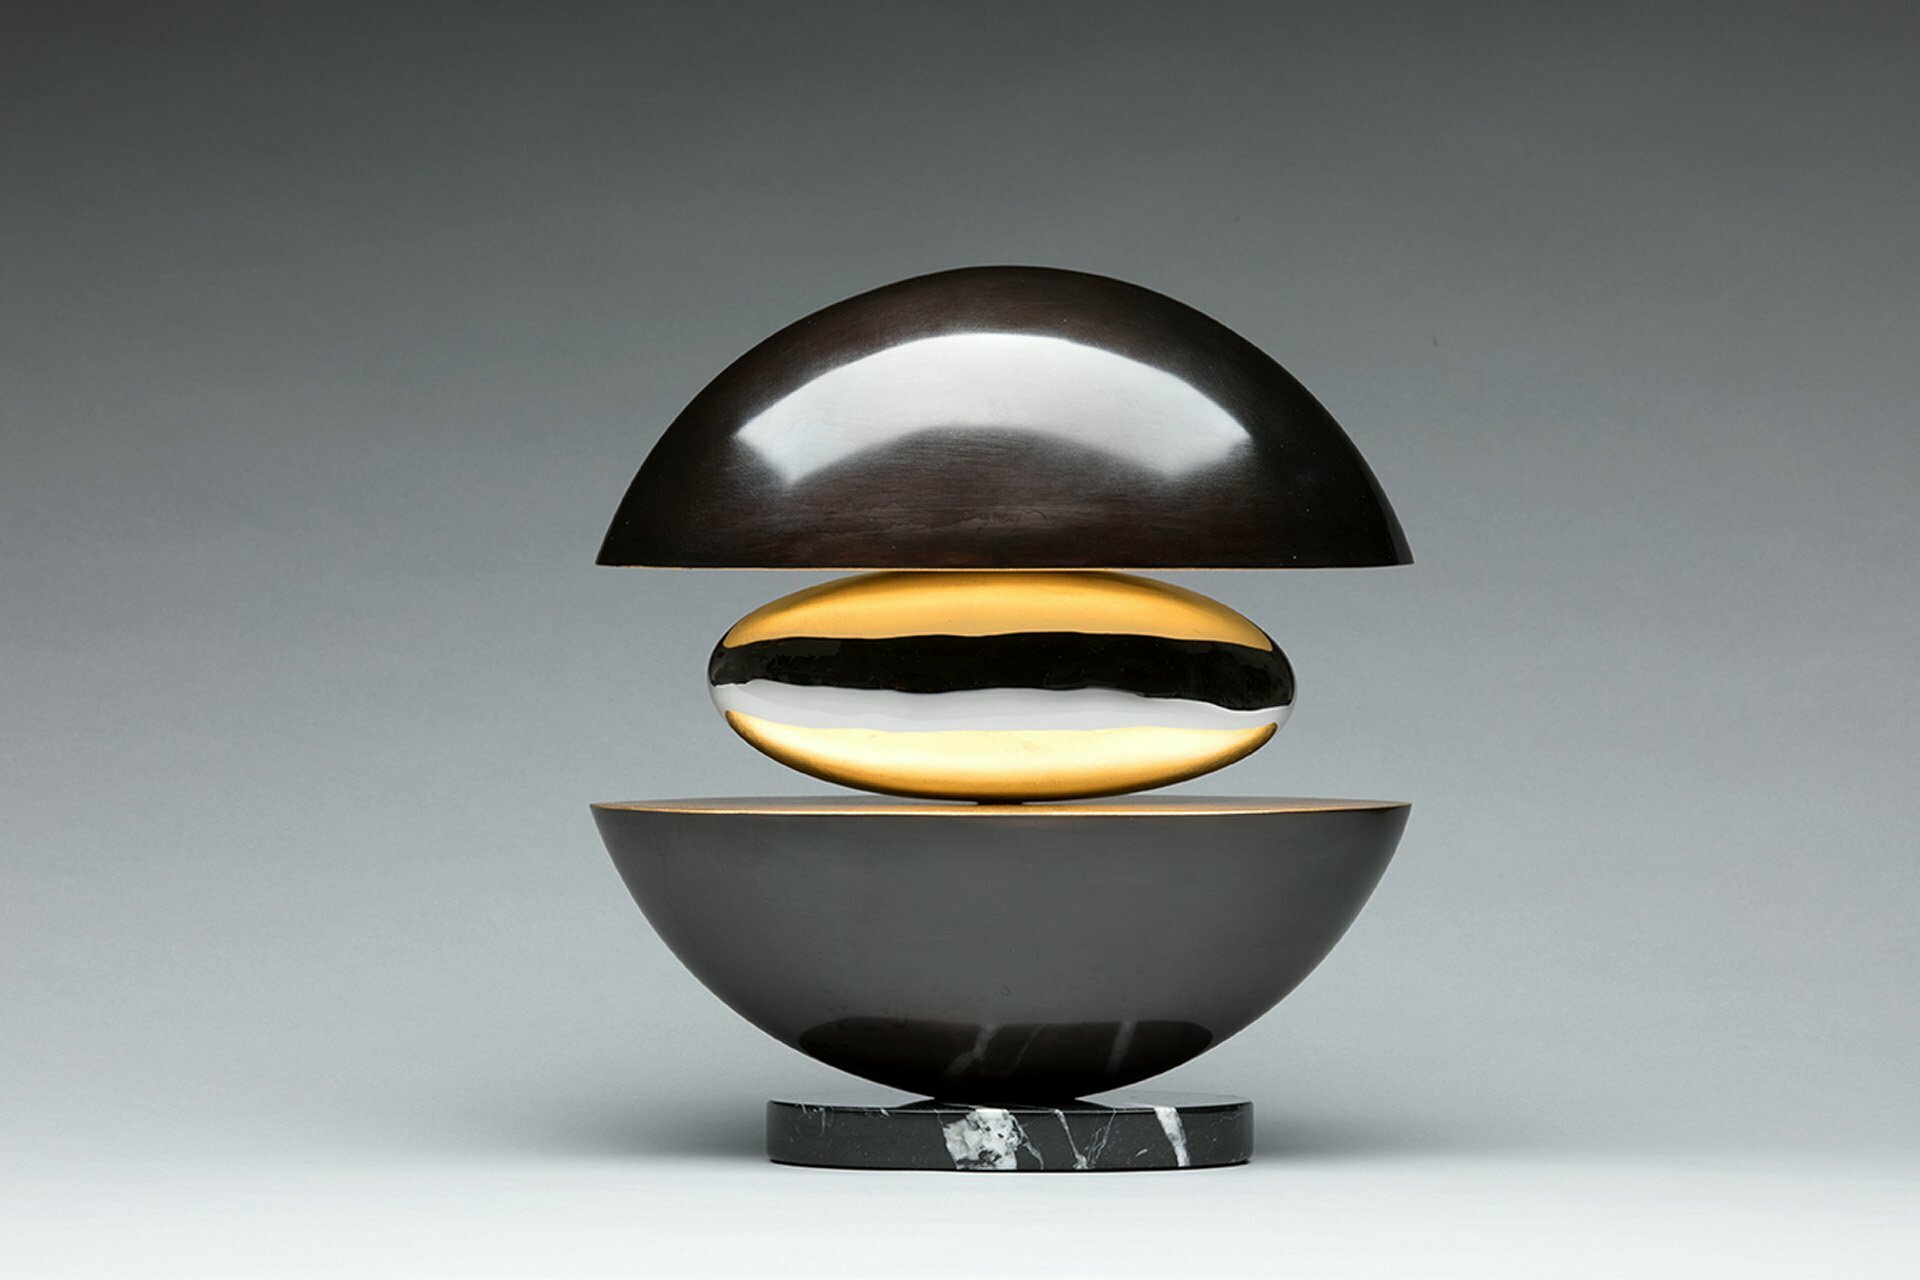 Ted Schaal; Rise I, 2018, Original Sculpture Bronze, 11 x 11 inches. Artwork description: 241 Elegant round abstract sculpture that combines Bronze, mirror polished stainless steel and 24 karat Gold leaf. ...